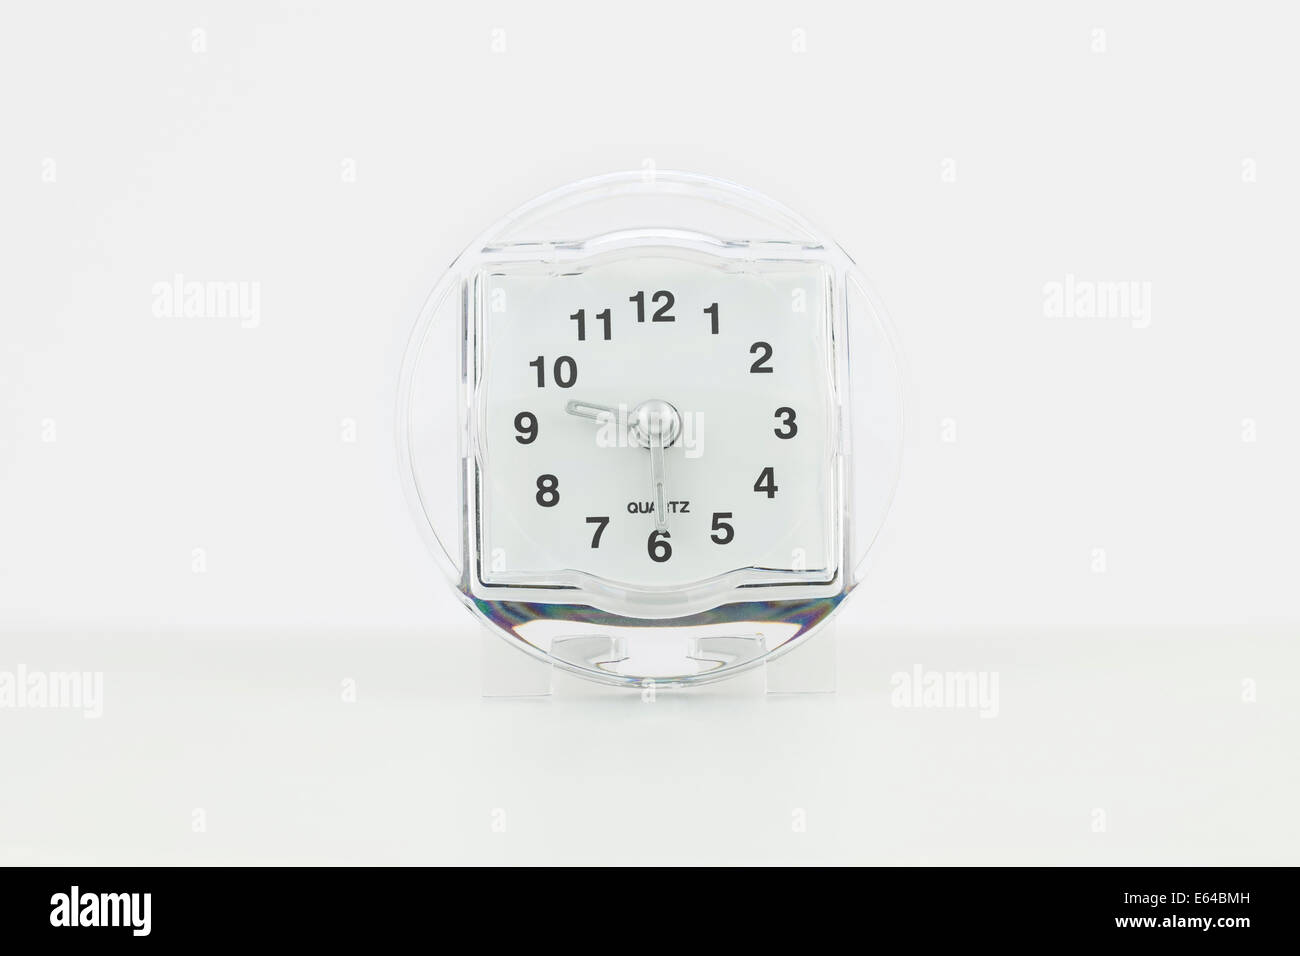 Clock 9 30 High Resolution Stock Photography and Images - Alamy